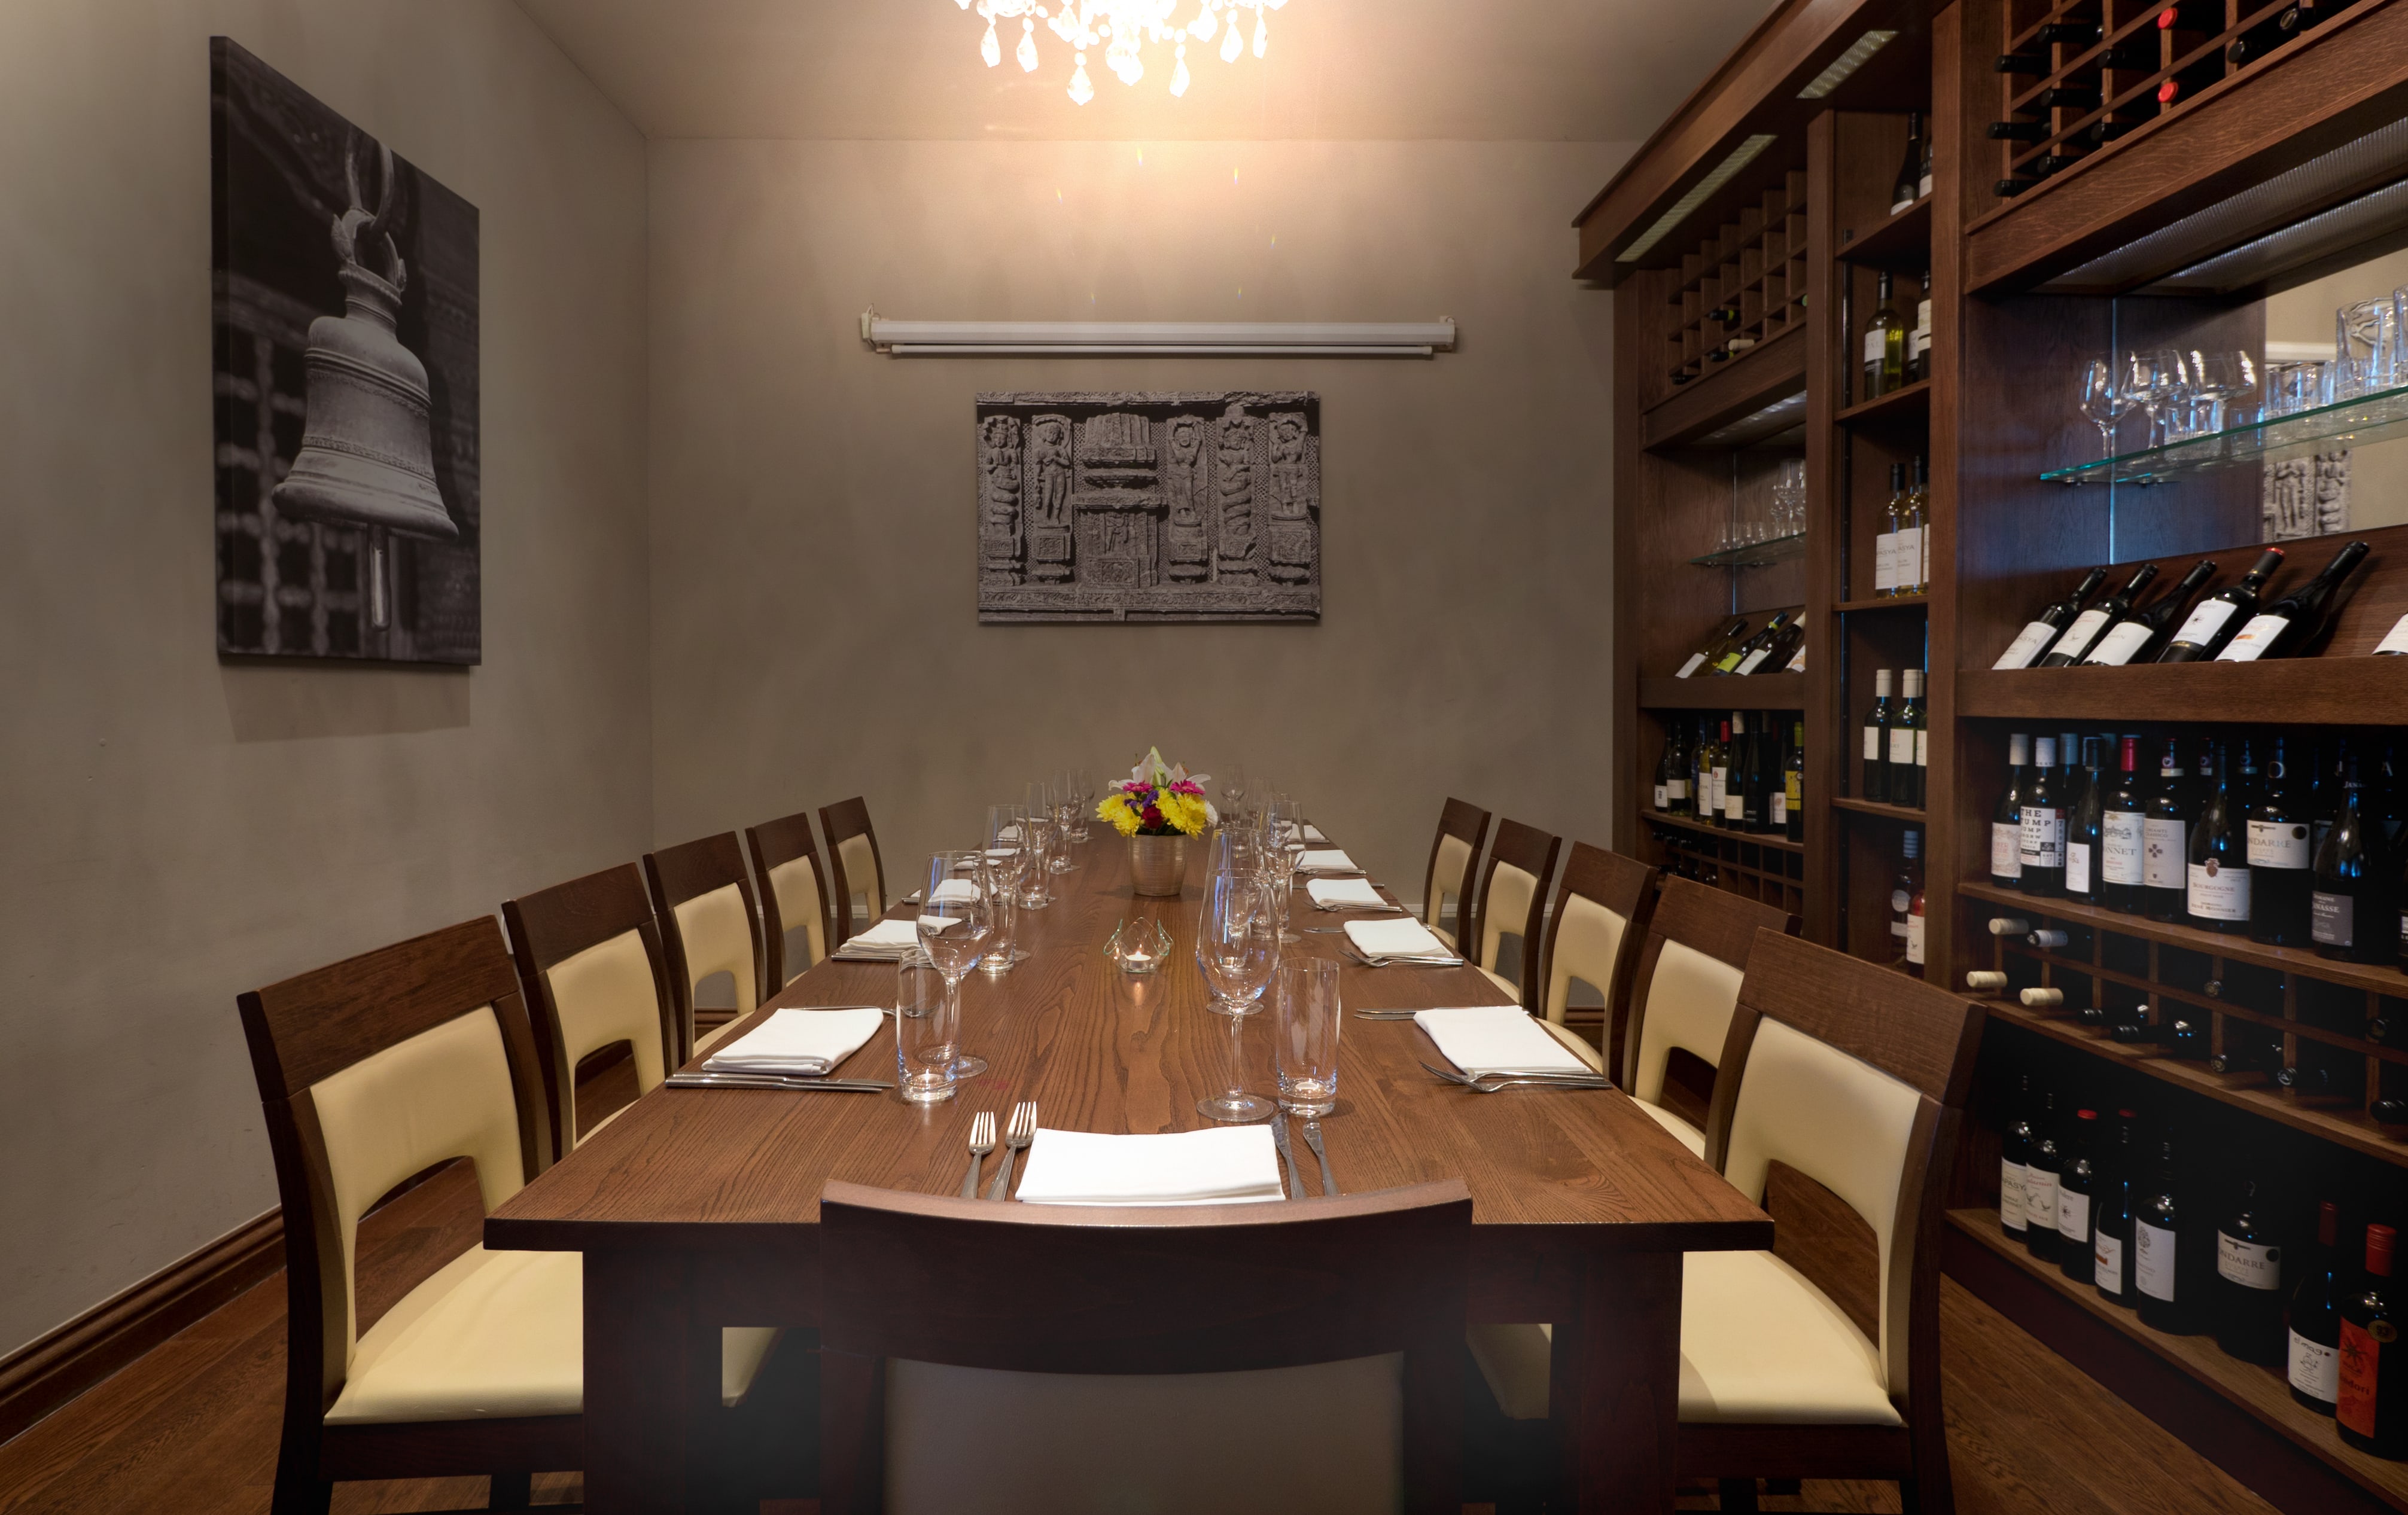 The private dining Grand Spice room